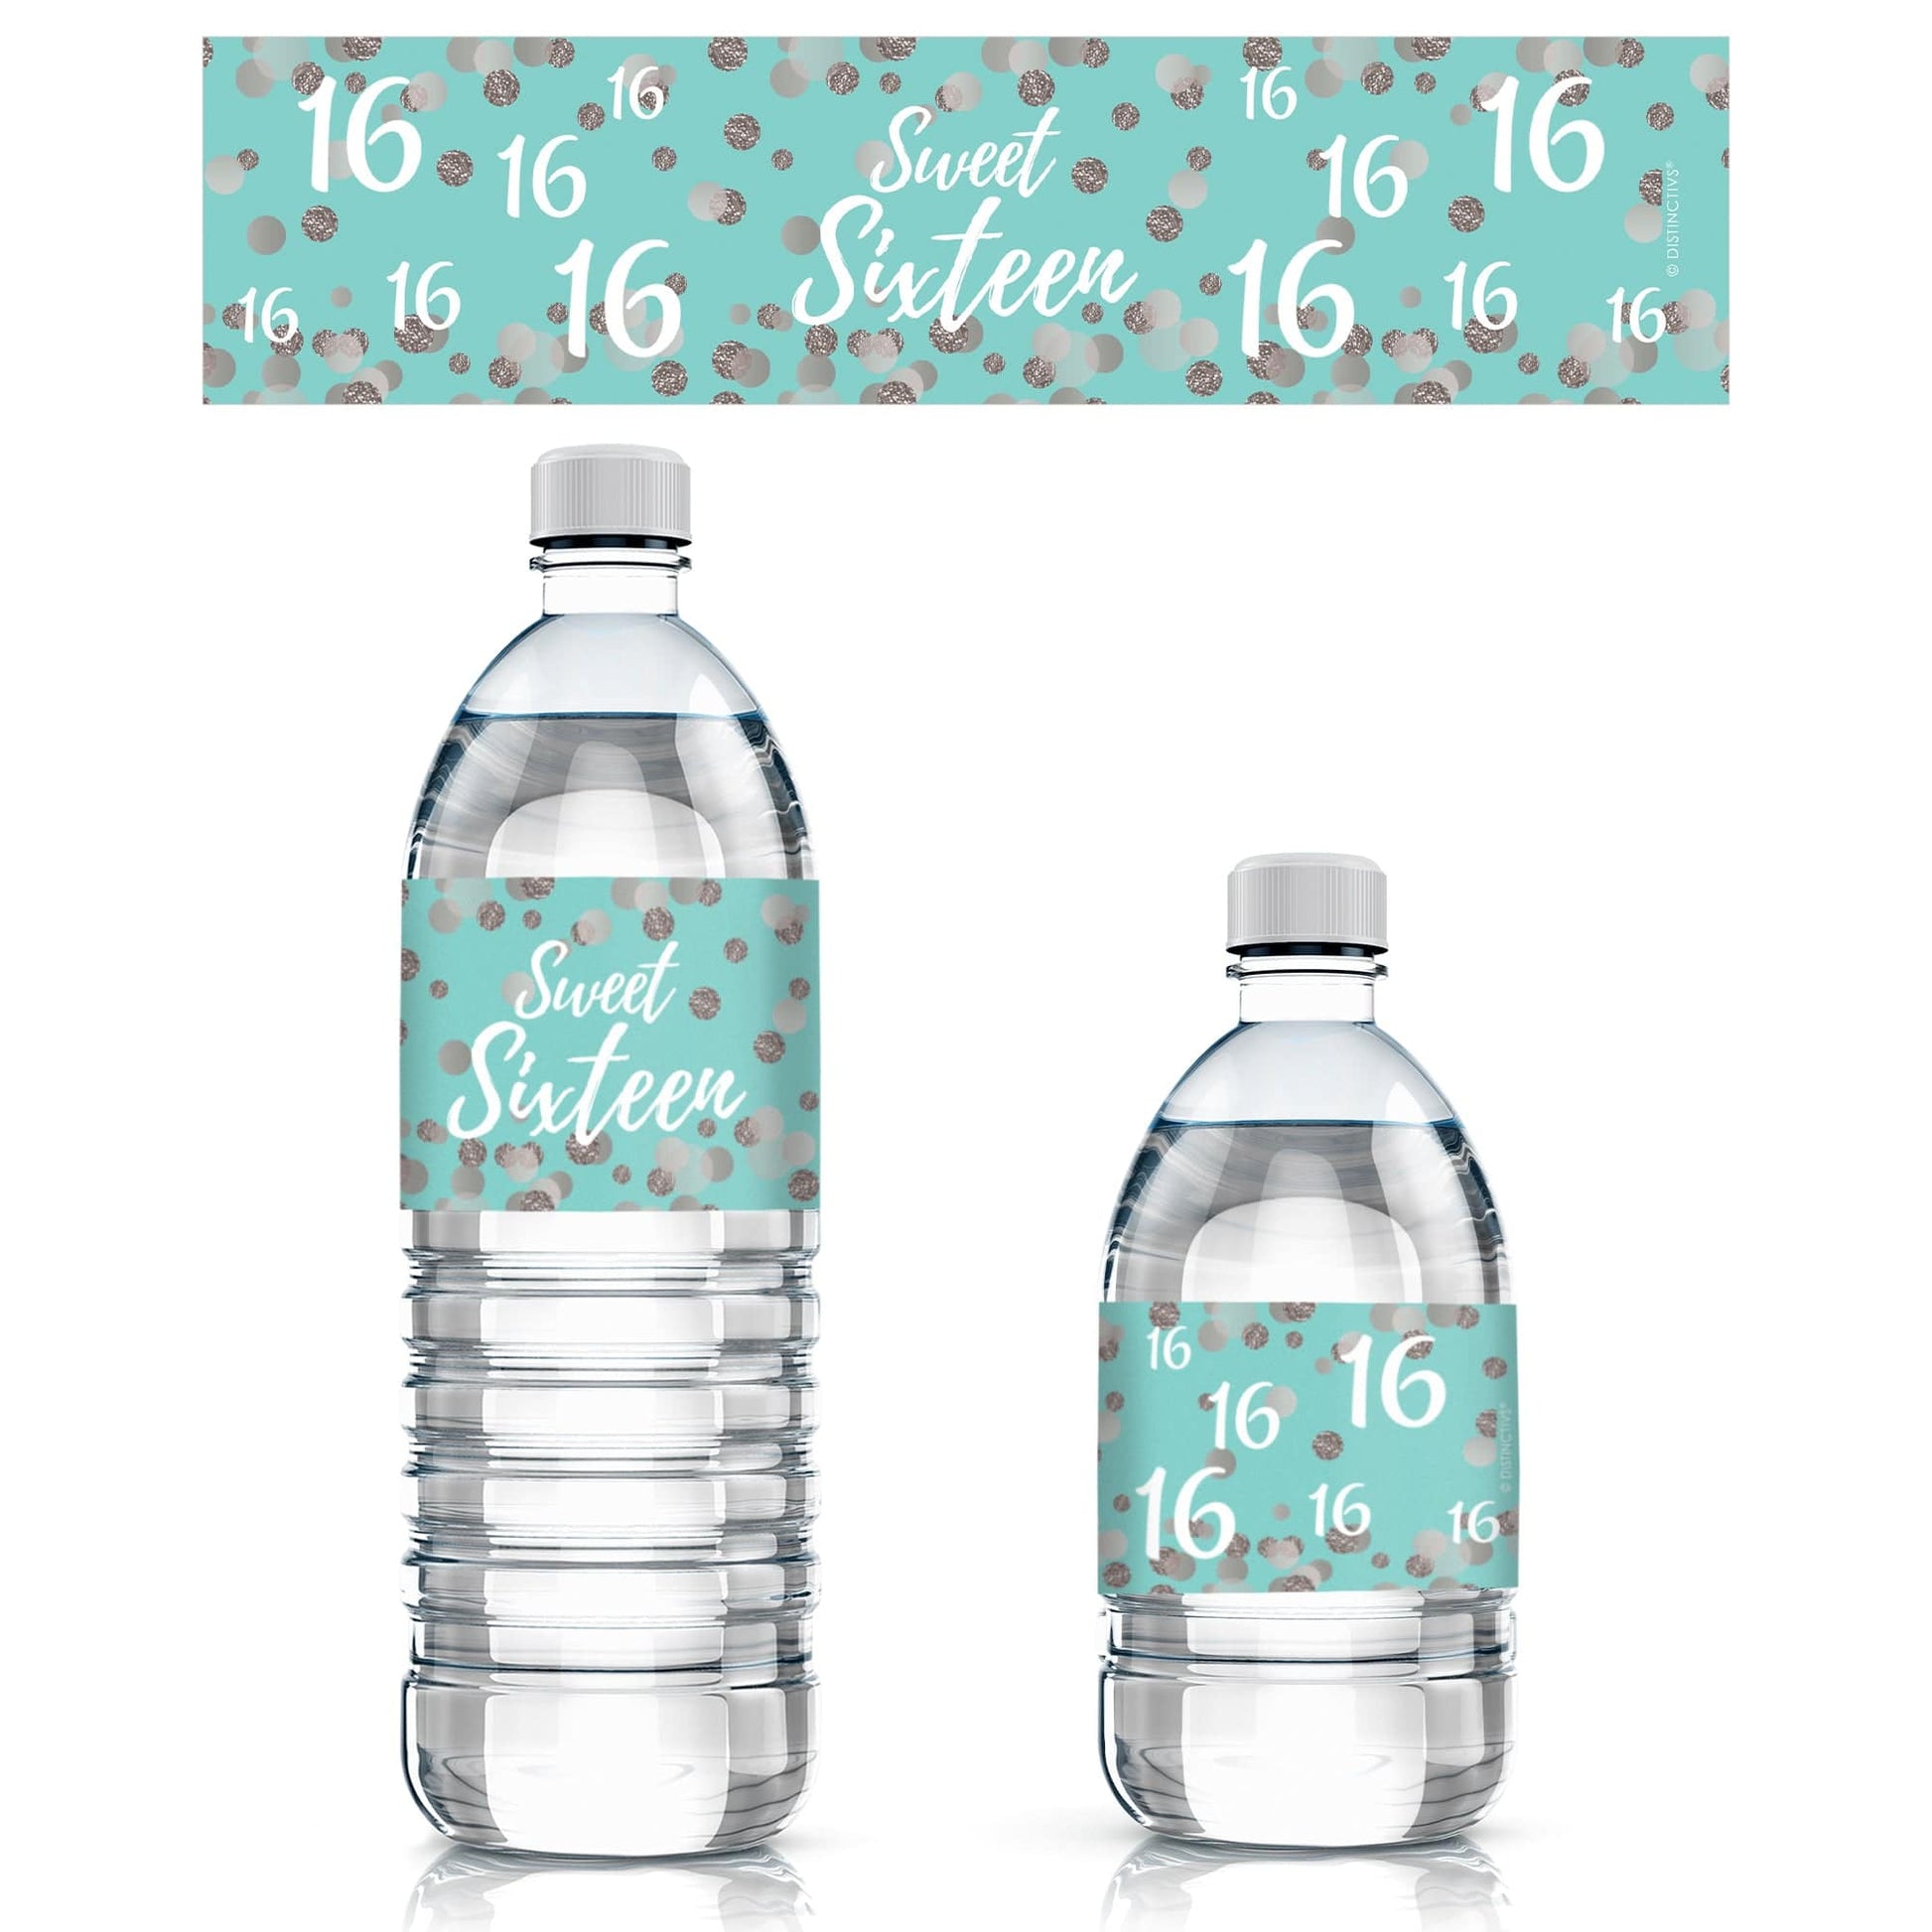 Make your Sweet 16 a night to remember with these beautiful blue and silver water bottle labels.